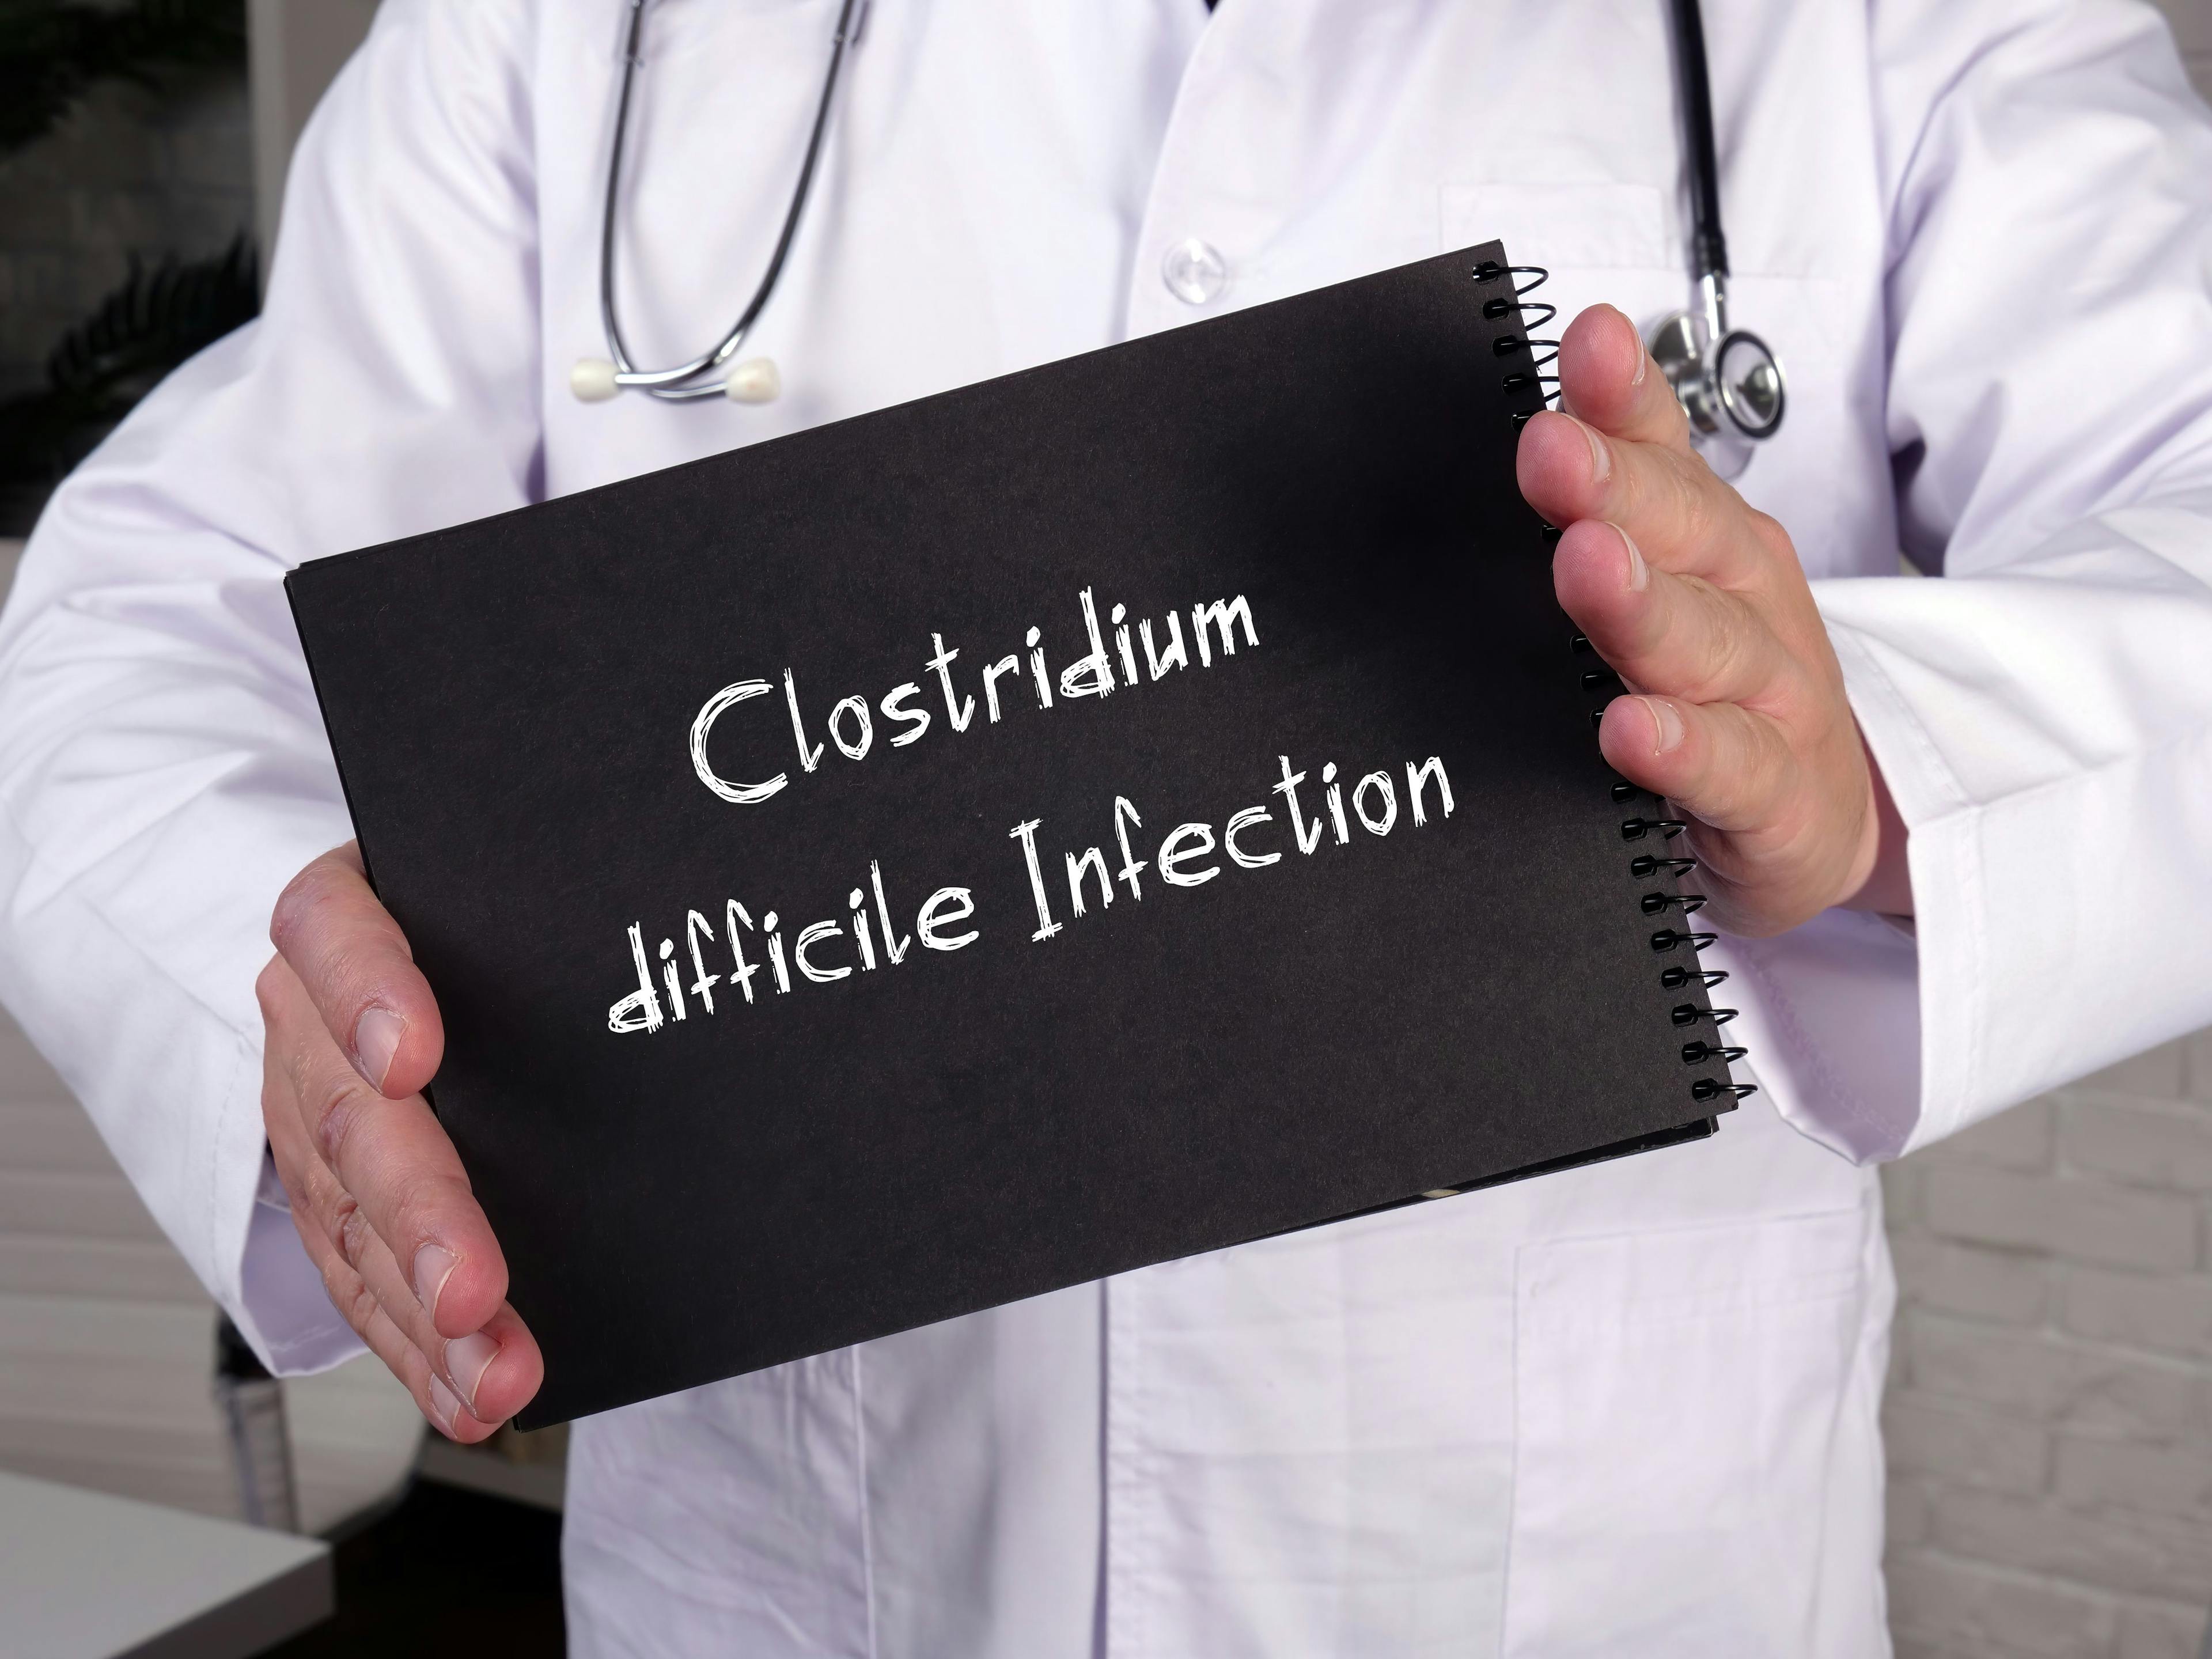 Fecal Microbiota Suspension Considered Safe for Recurrent C. Difficile Infection